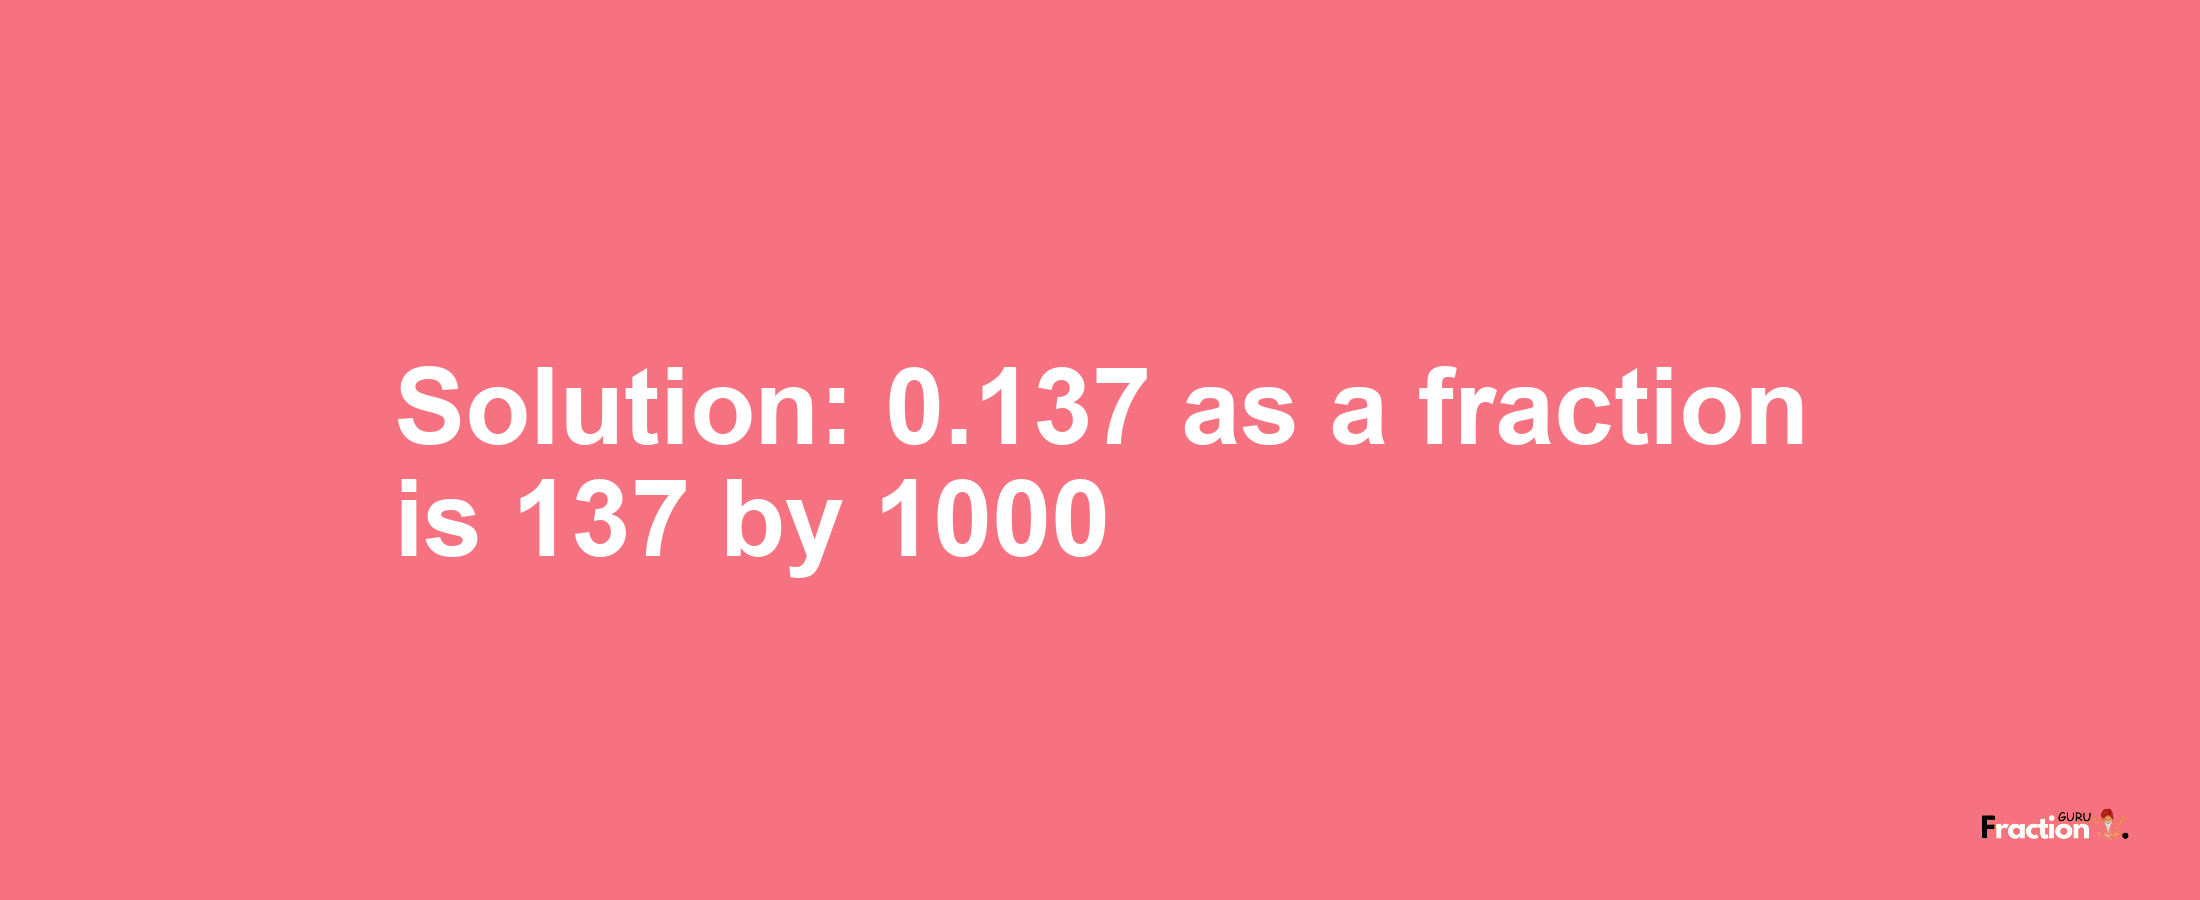 Solution:0.137 as a fraction is 137/1000